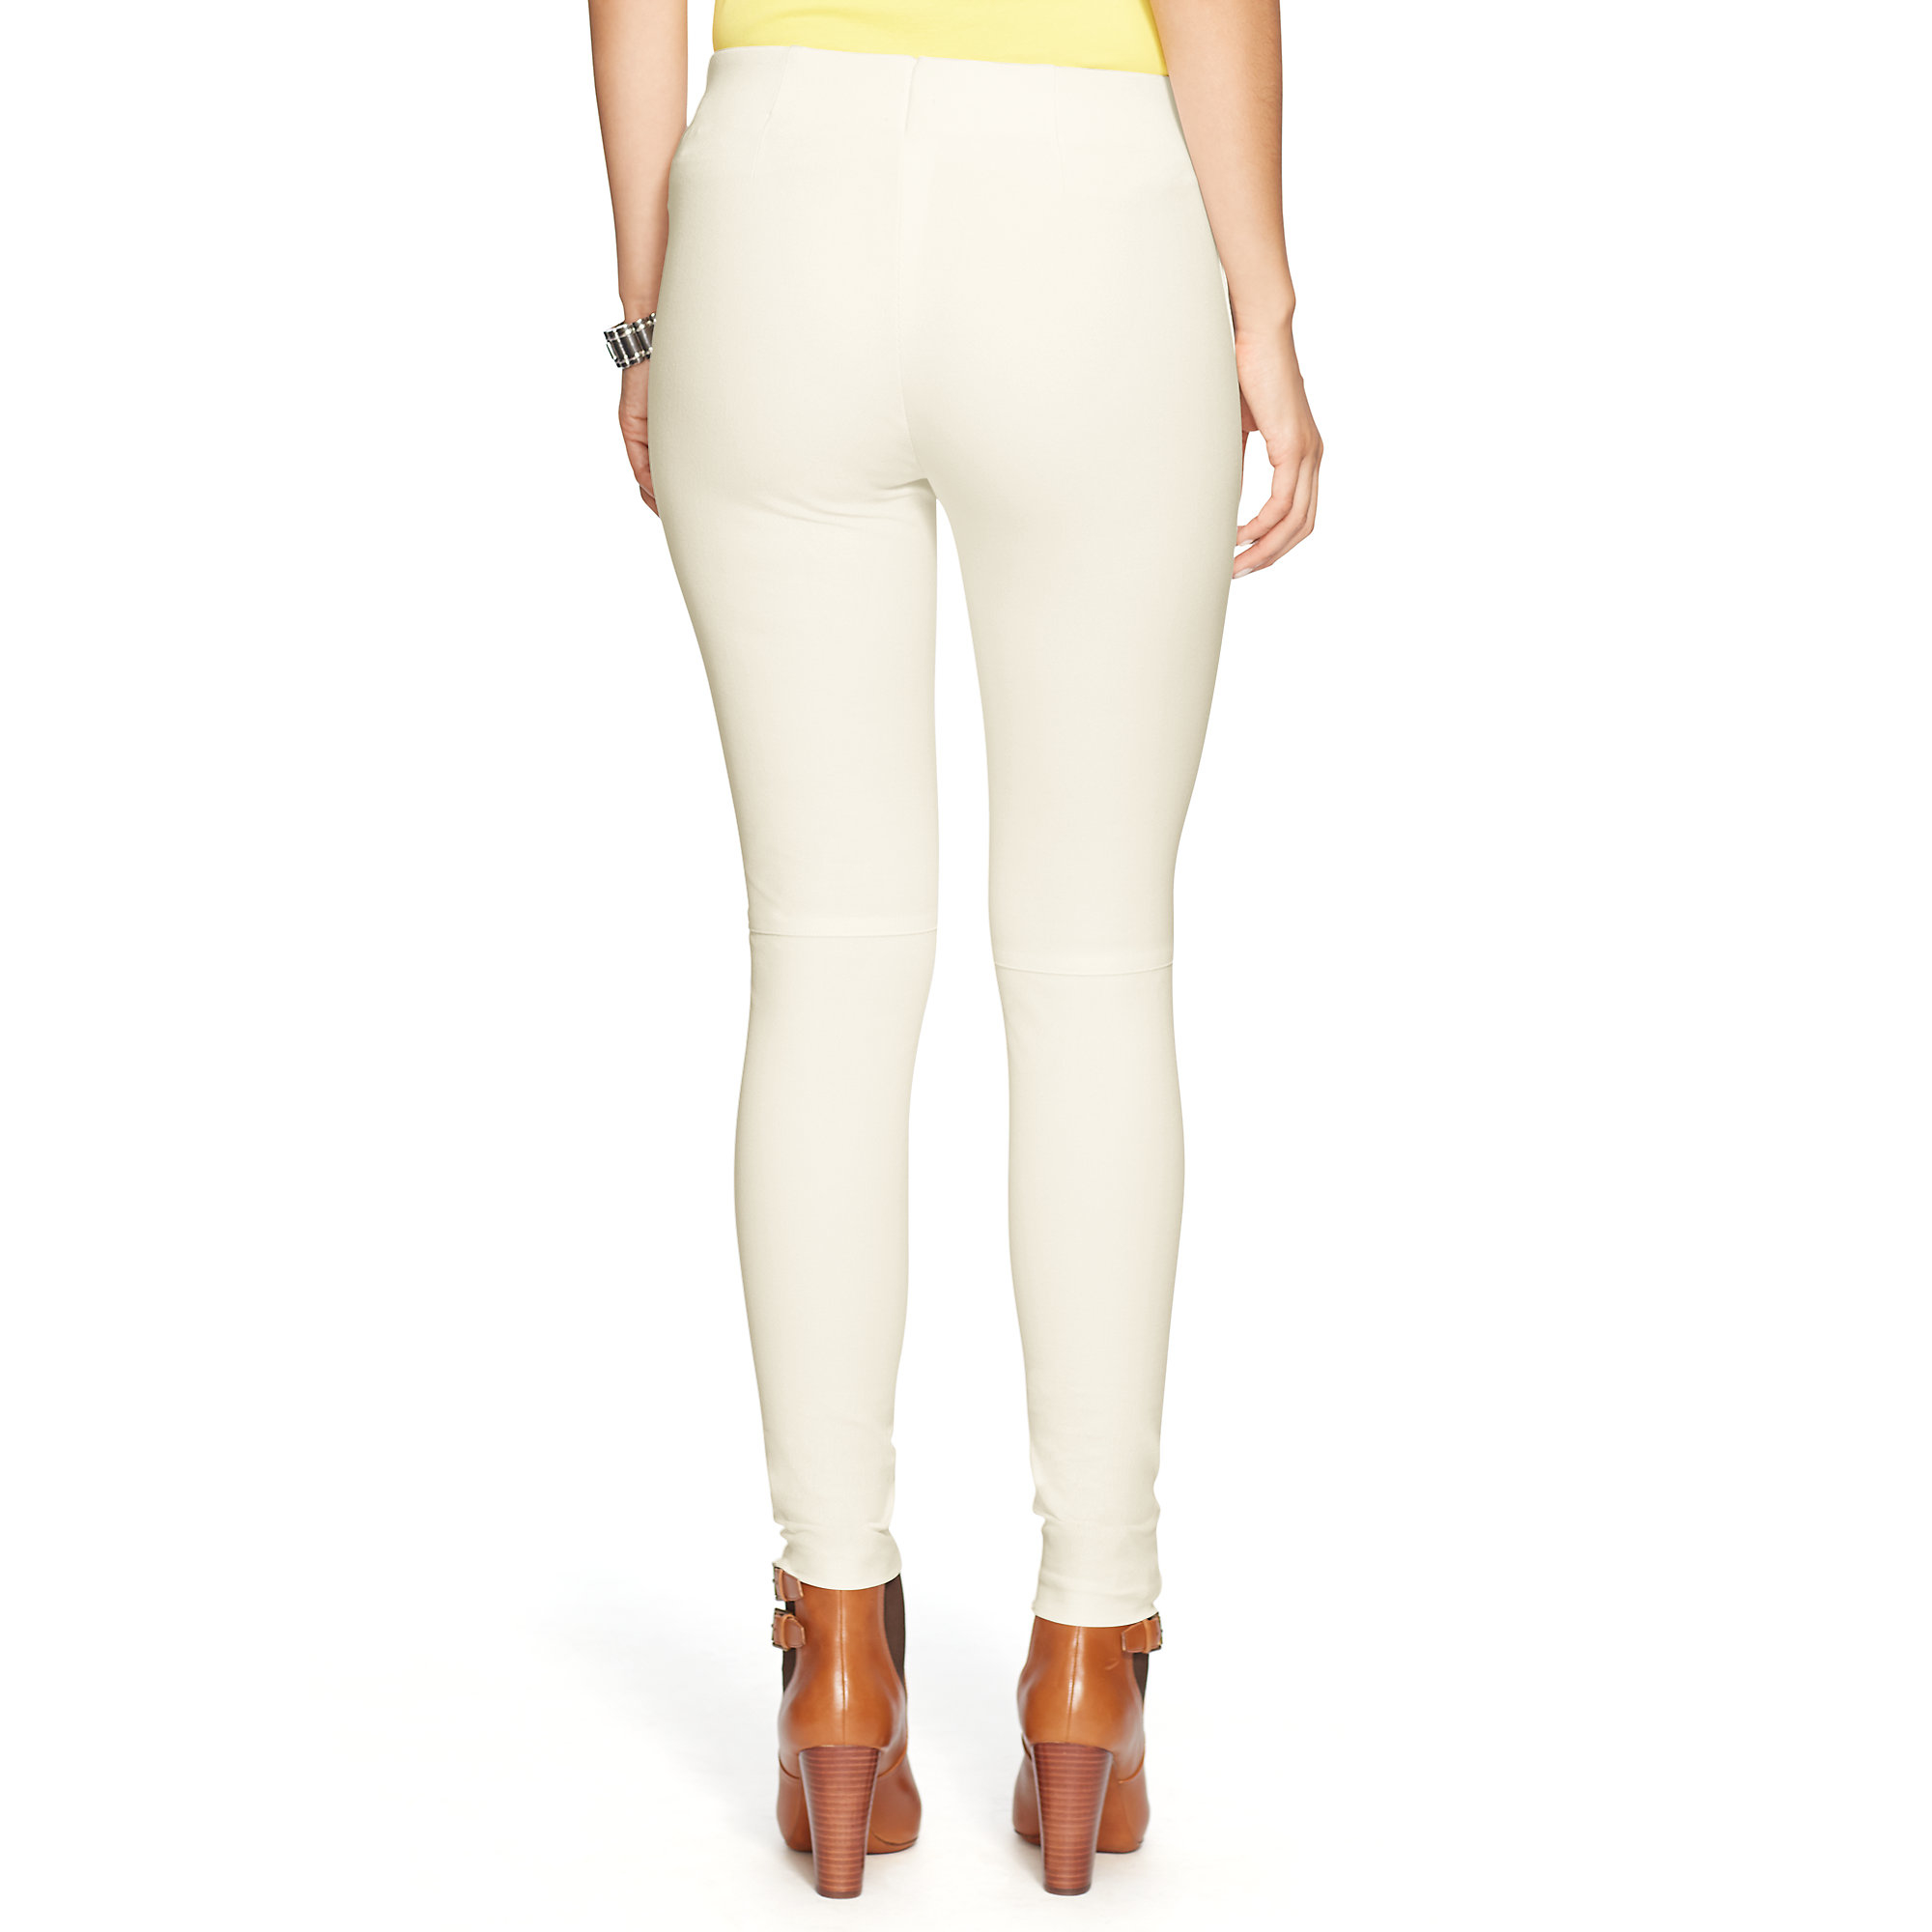 Ralph Lauren Stretch Cotton Skinny Pant in Natural - Lyst